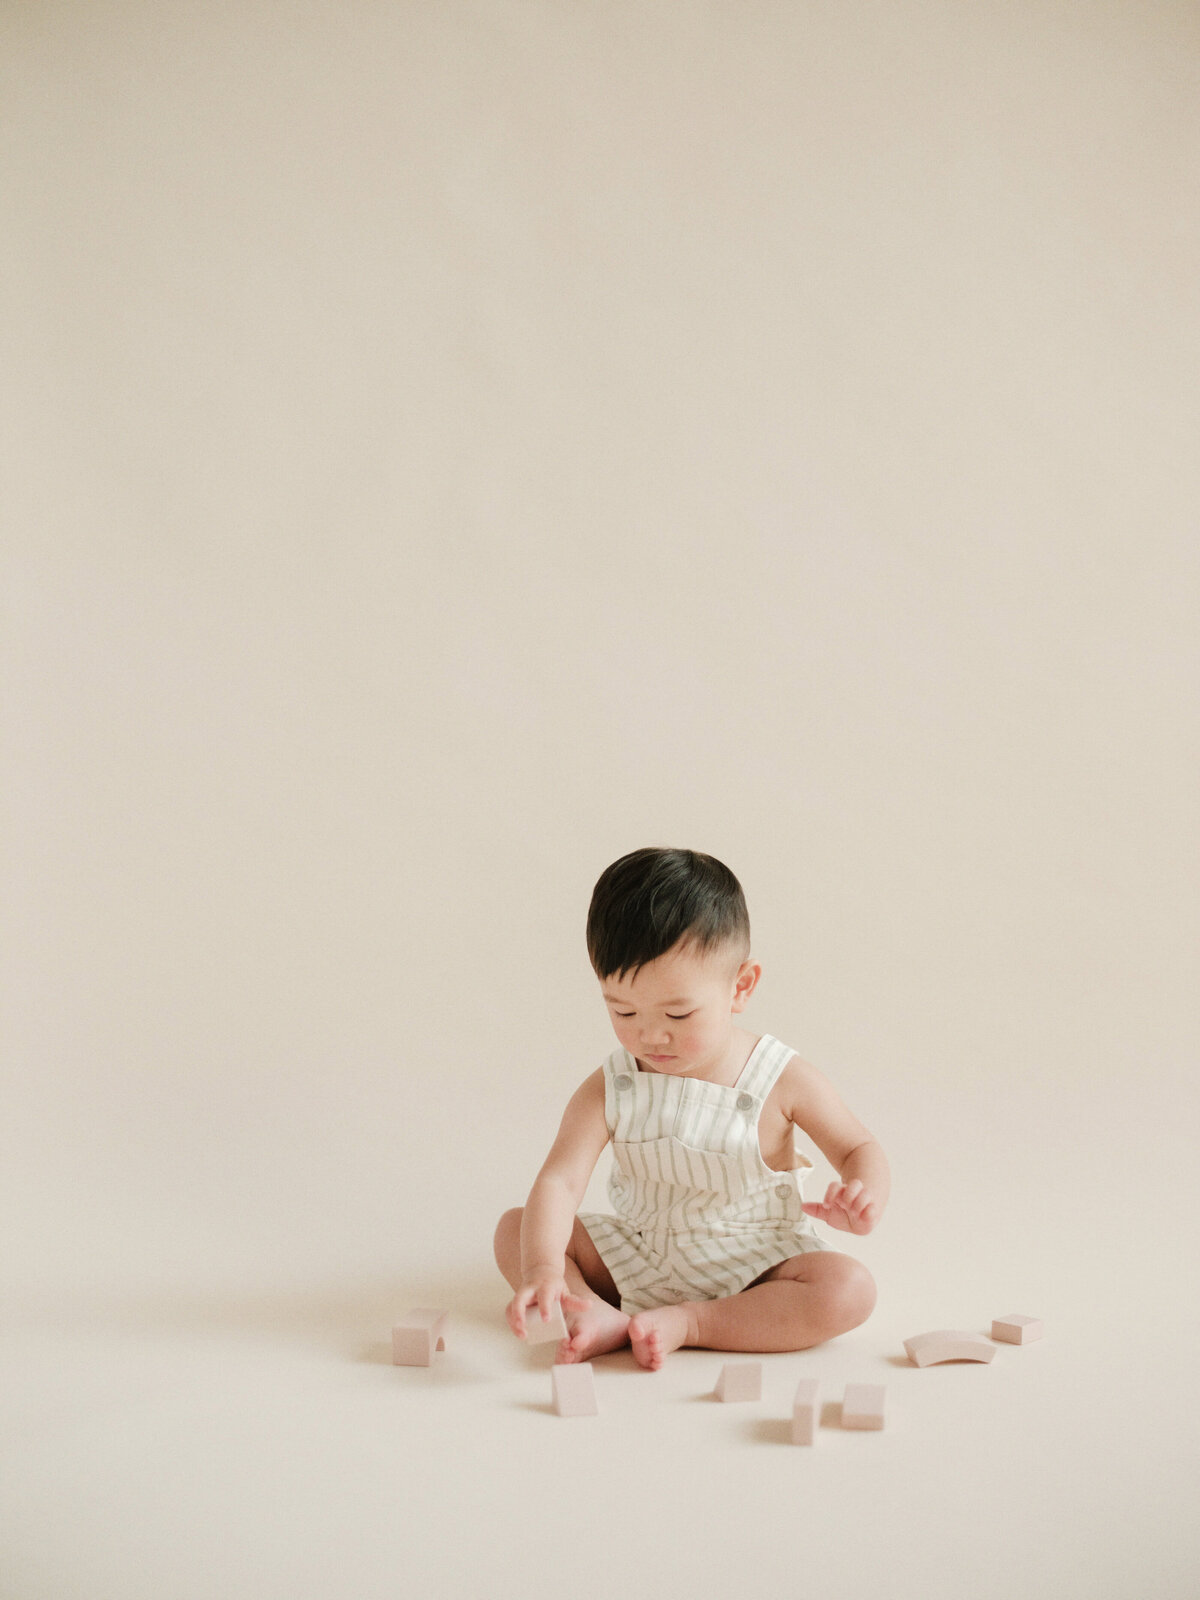 Yee Lo Family Spring Studio Session Cassie Valente Photography 018